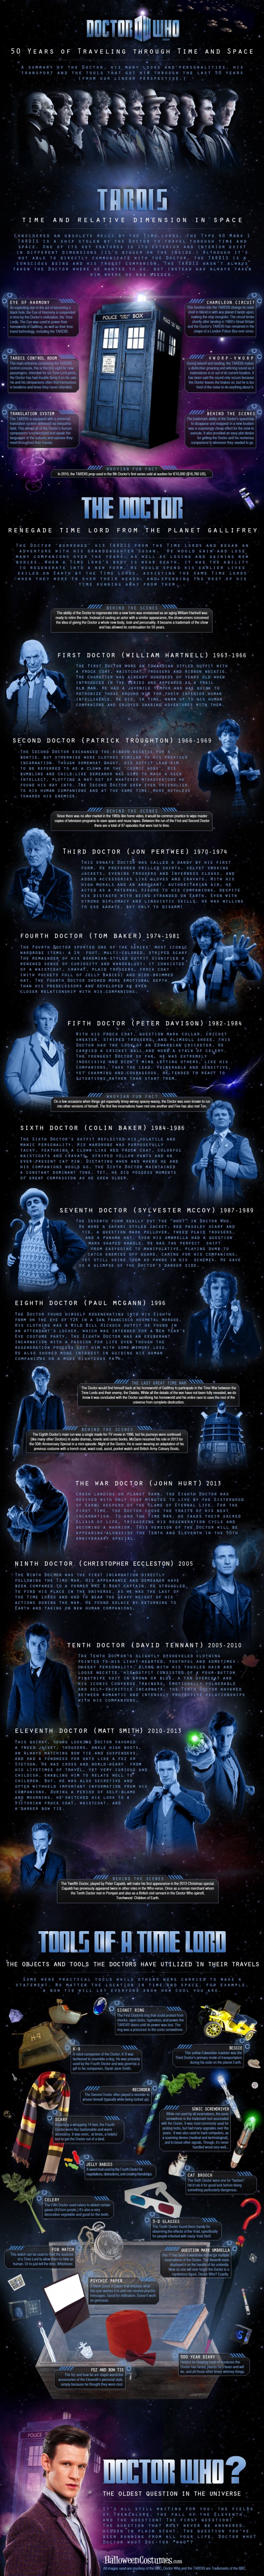 doctor-who-infographic